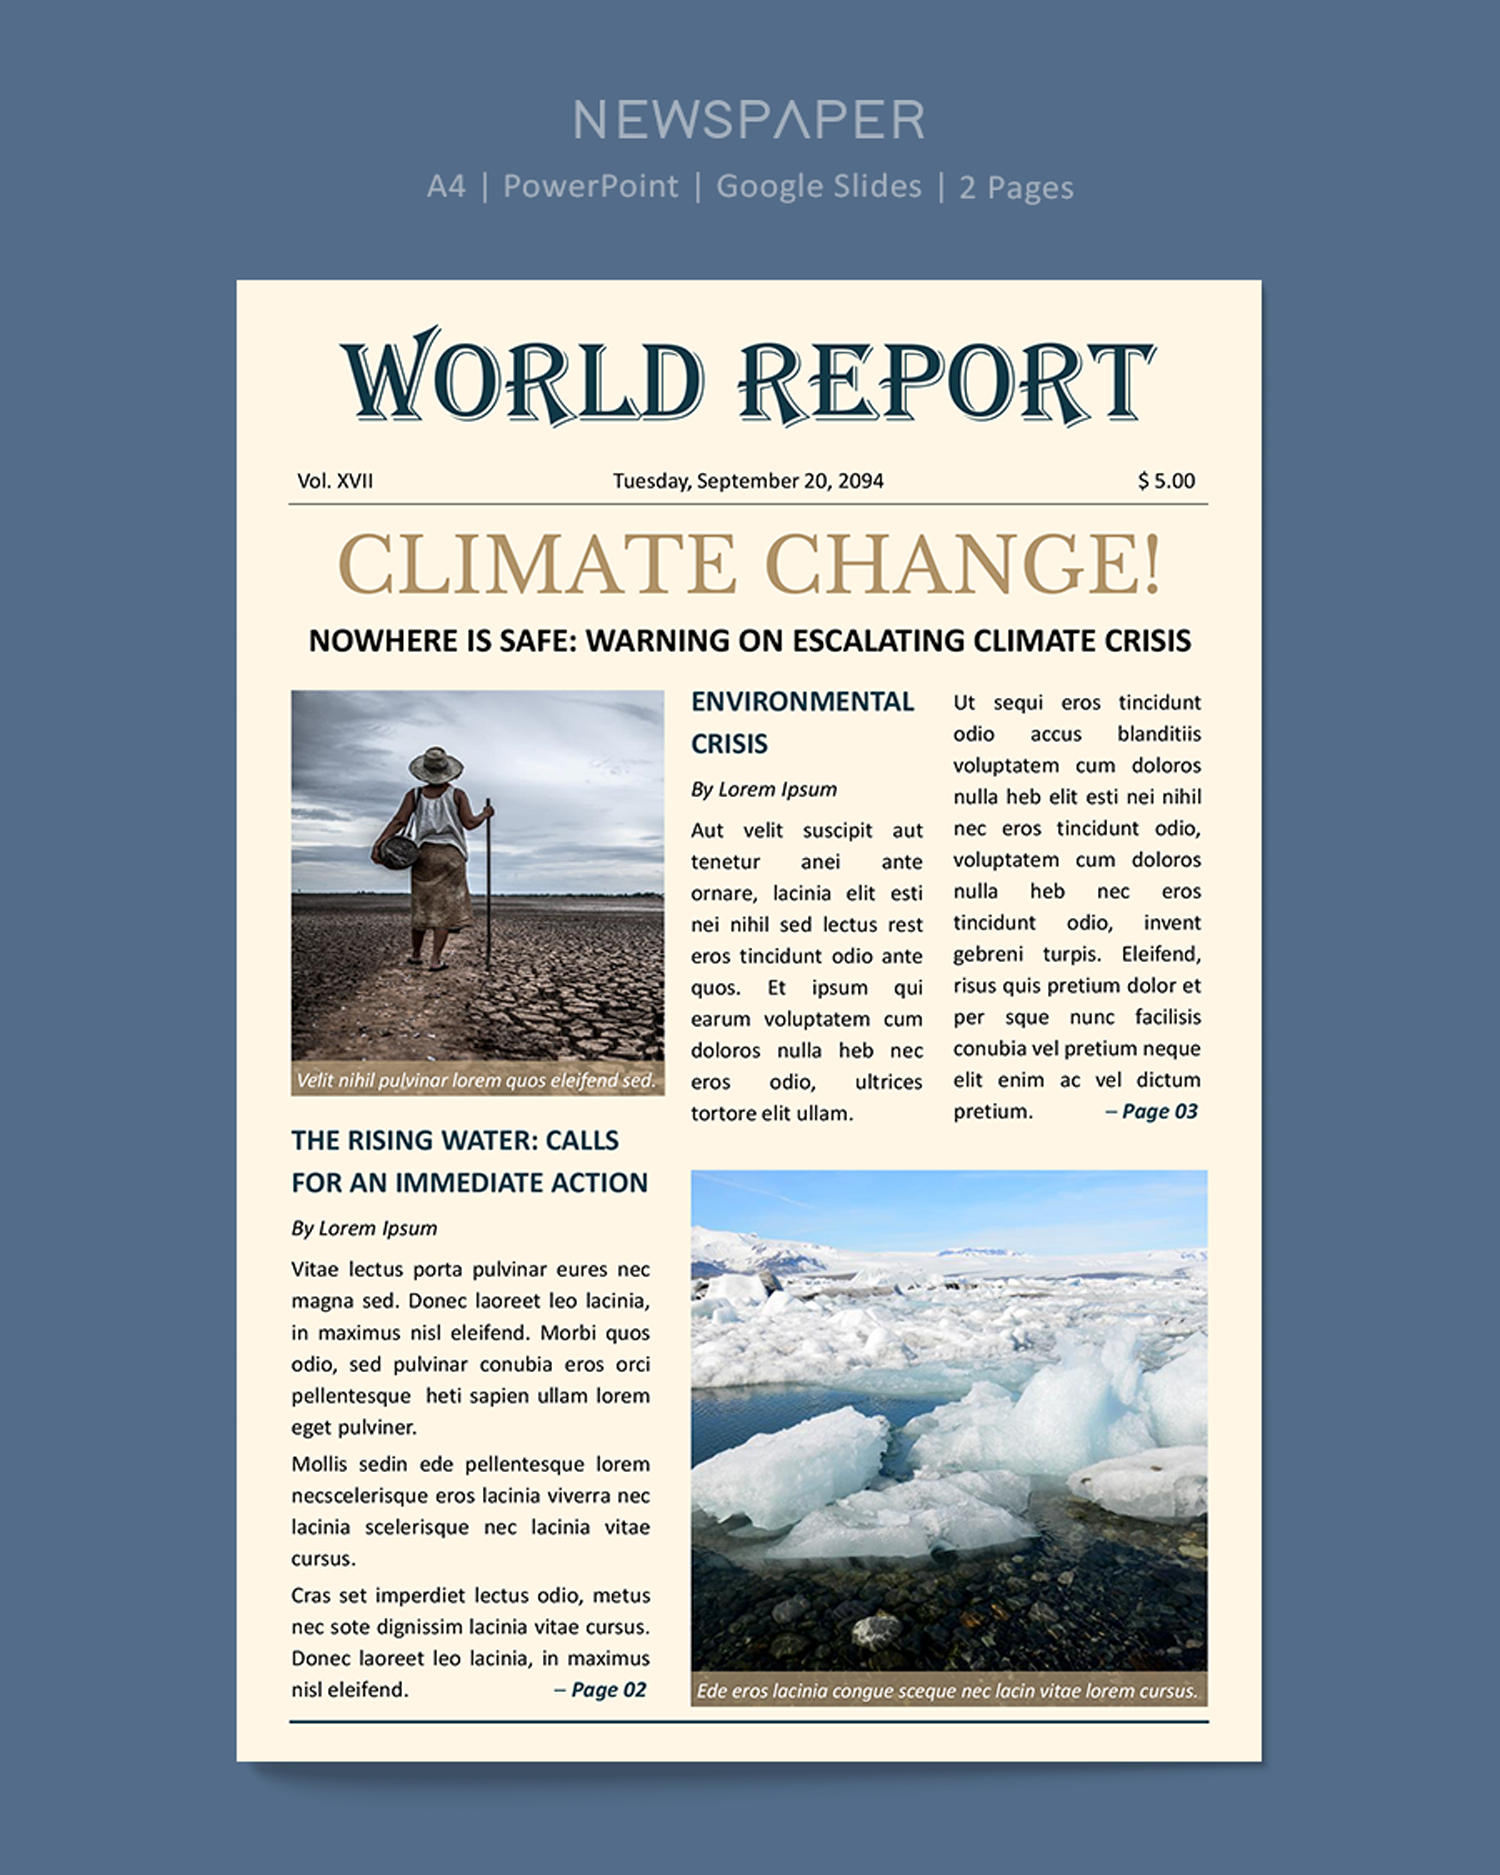 Climate Change Newspaper Template - PowerPoint, Google Slides